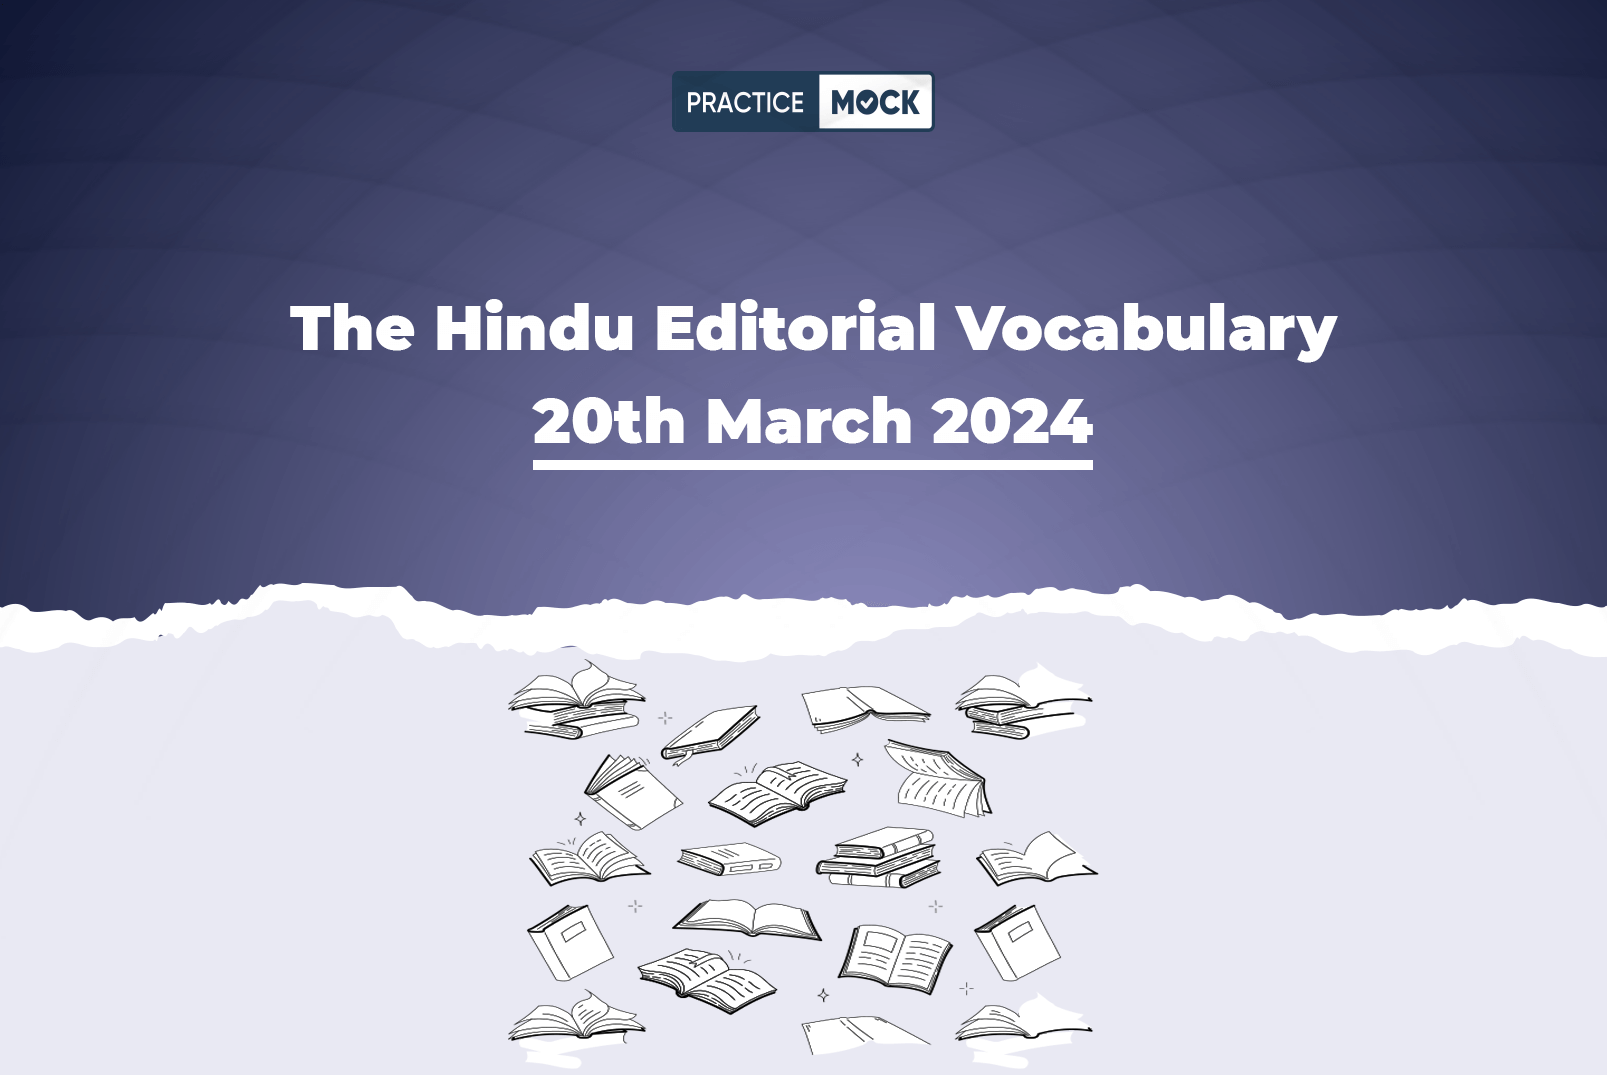 The Hindu Editorial Vocabulary 20th March 2024